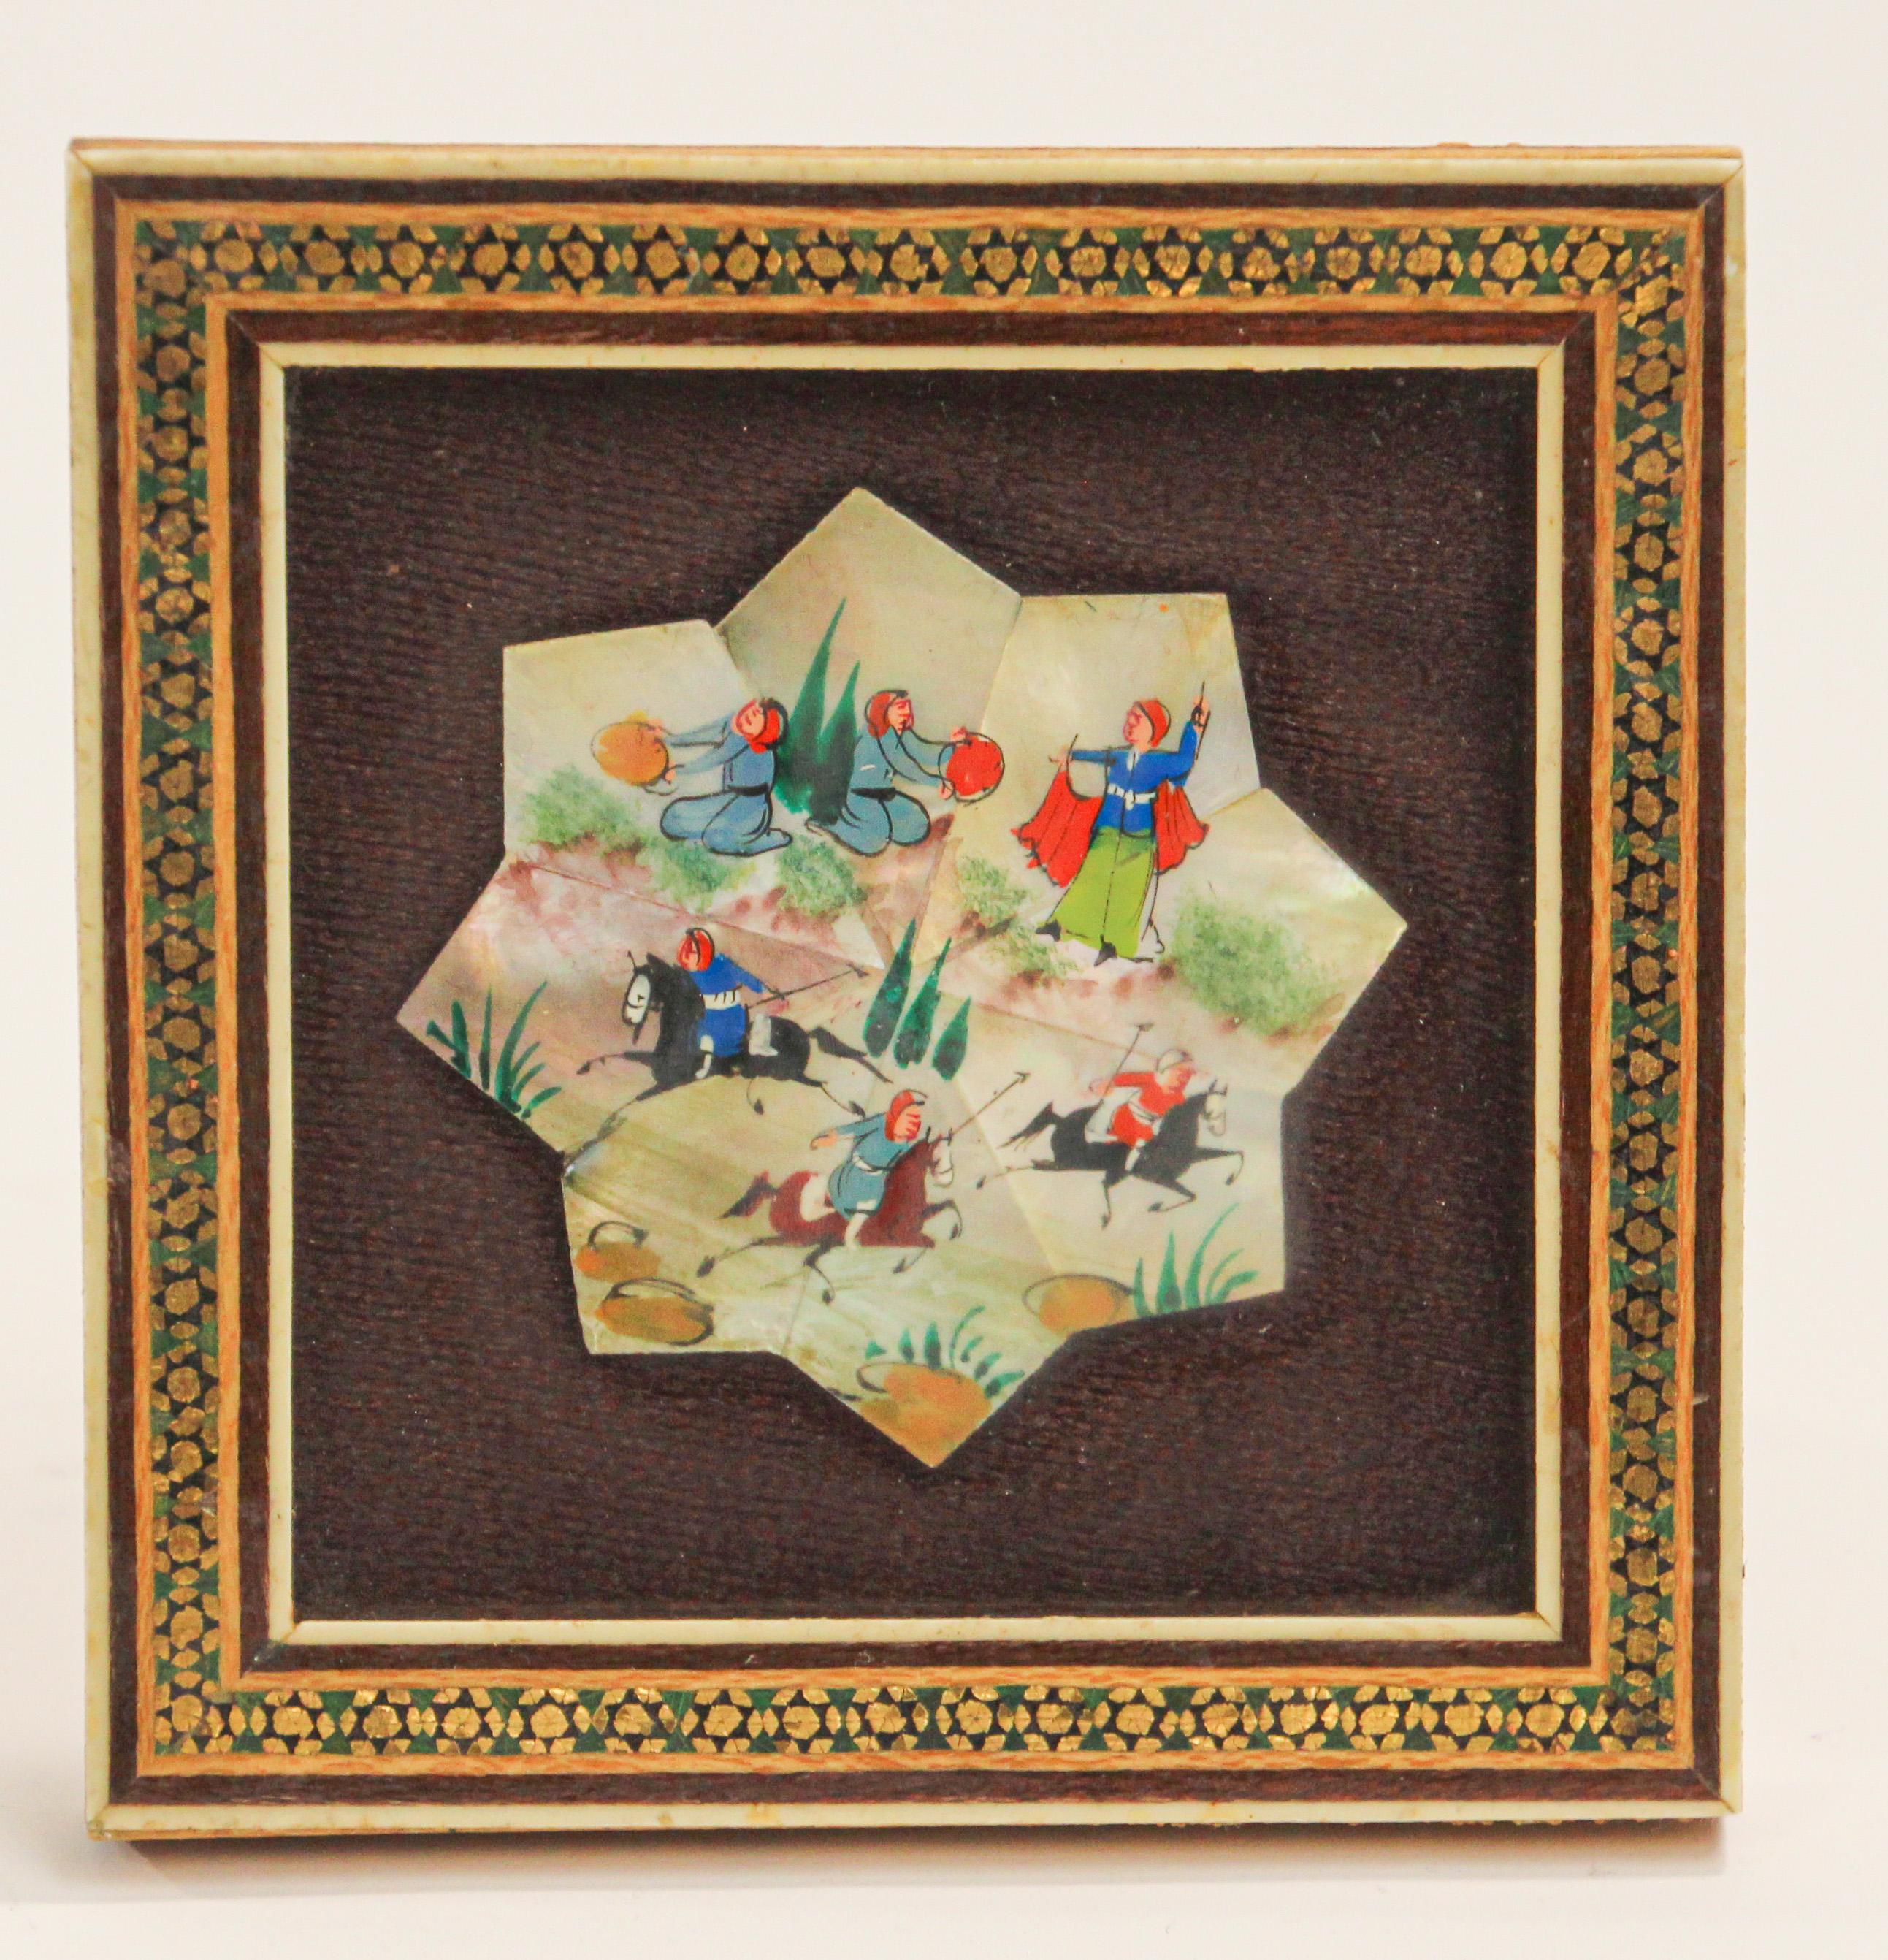 Middle Eastern miniature painting framed in a Moorish micro mosaic inlaid picture frame.
Middle Eastern Persian miniature painting on shell.
Scene of men riding horses, and dancers, very fine and colorful painting:
Intricate inlaid middle Eastern